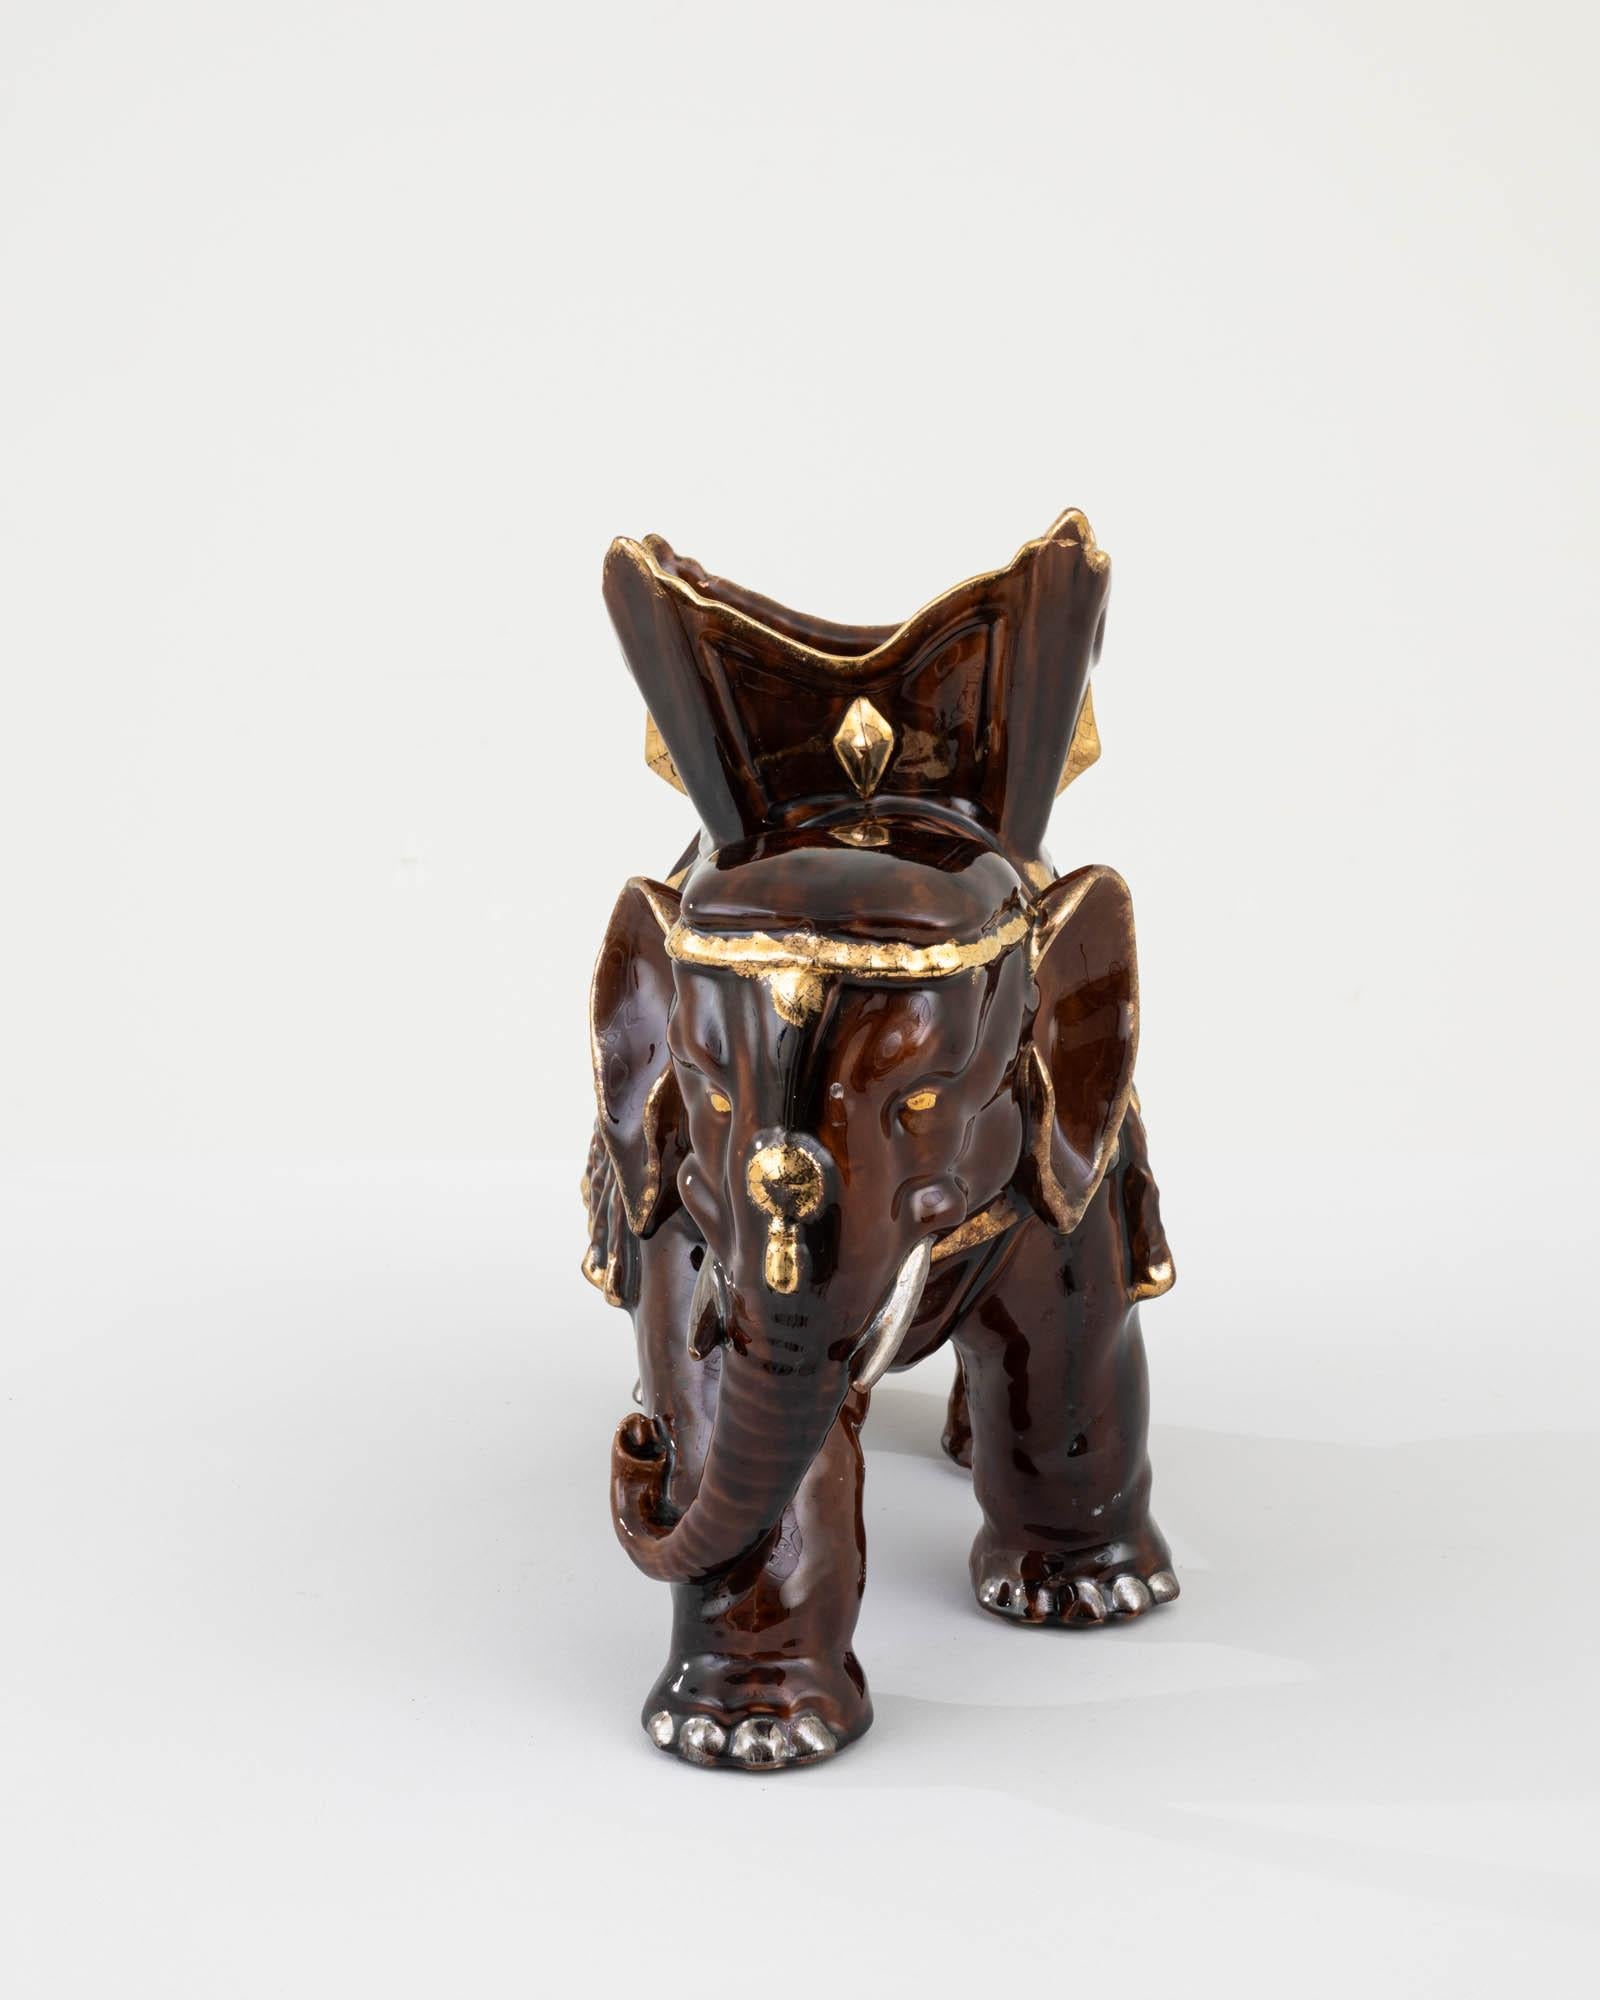 Step into the realm of vintage elegance with this exquisite 1960s French Ceramic Elephant, a true testament to mid-century artistry. This charming figurine showcases a rich, glossy chestnut glaze, complemented by opulent gold accents that highlight